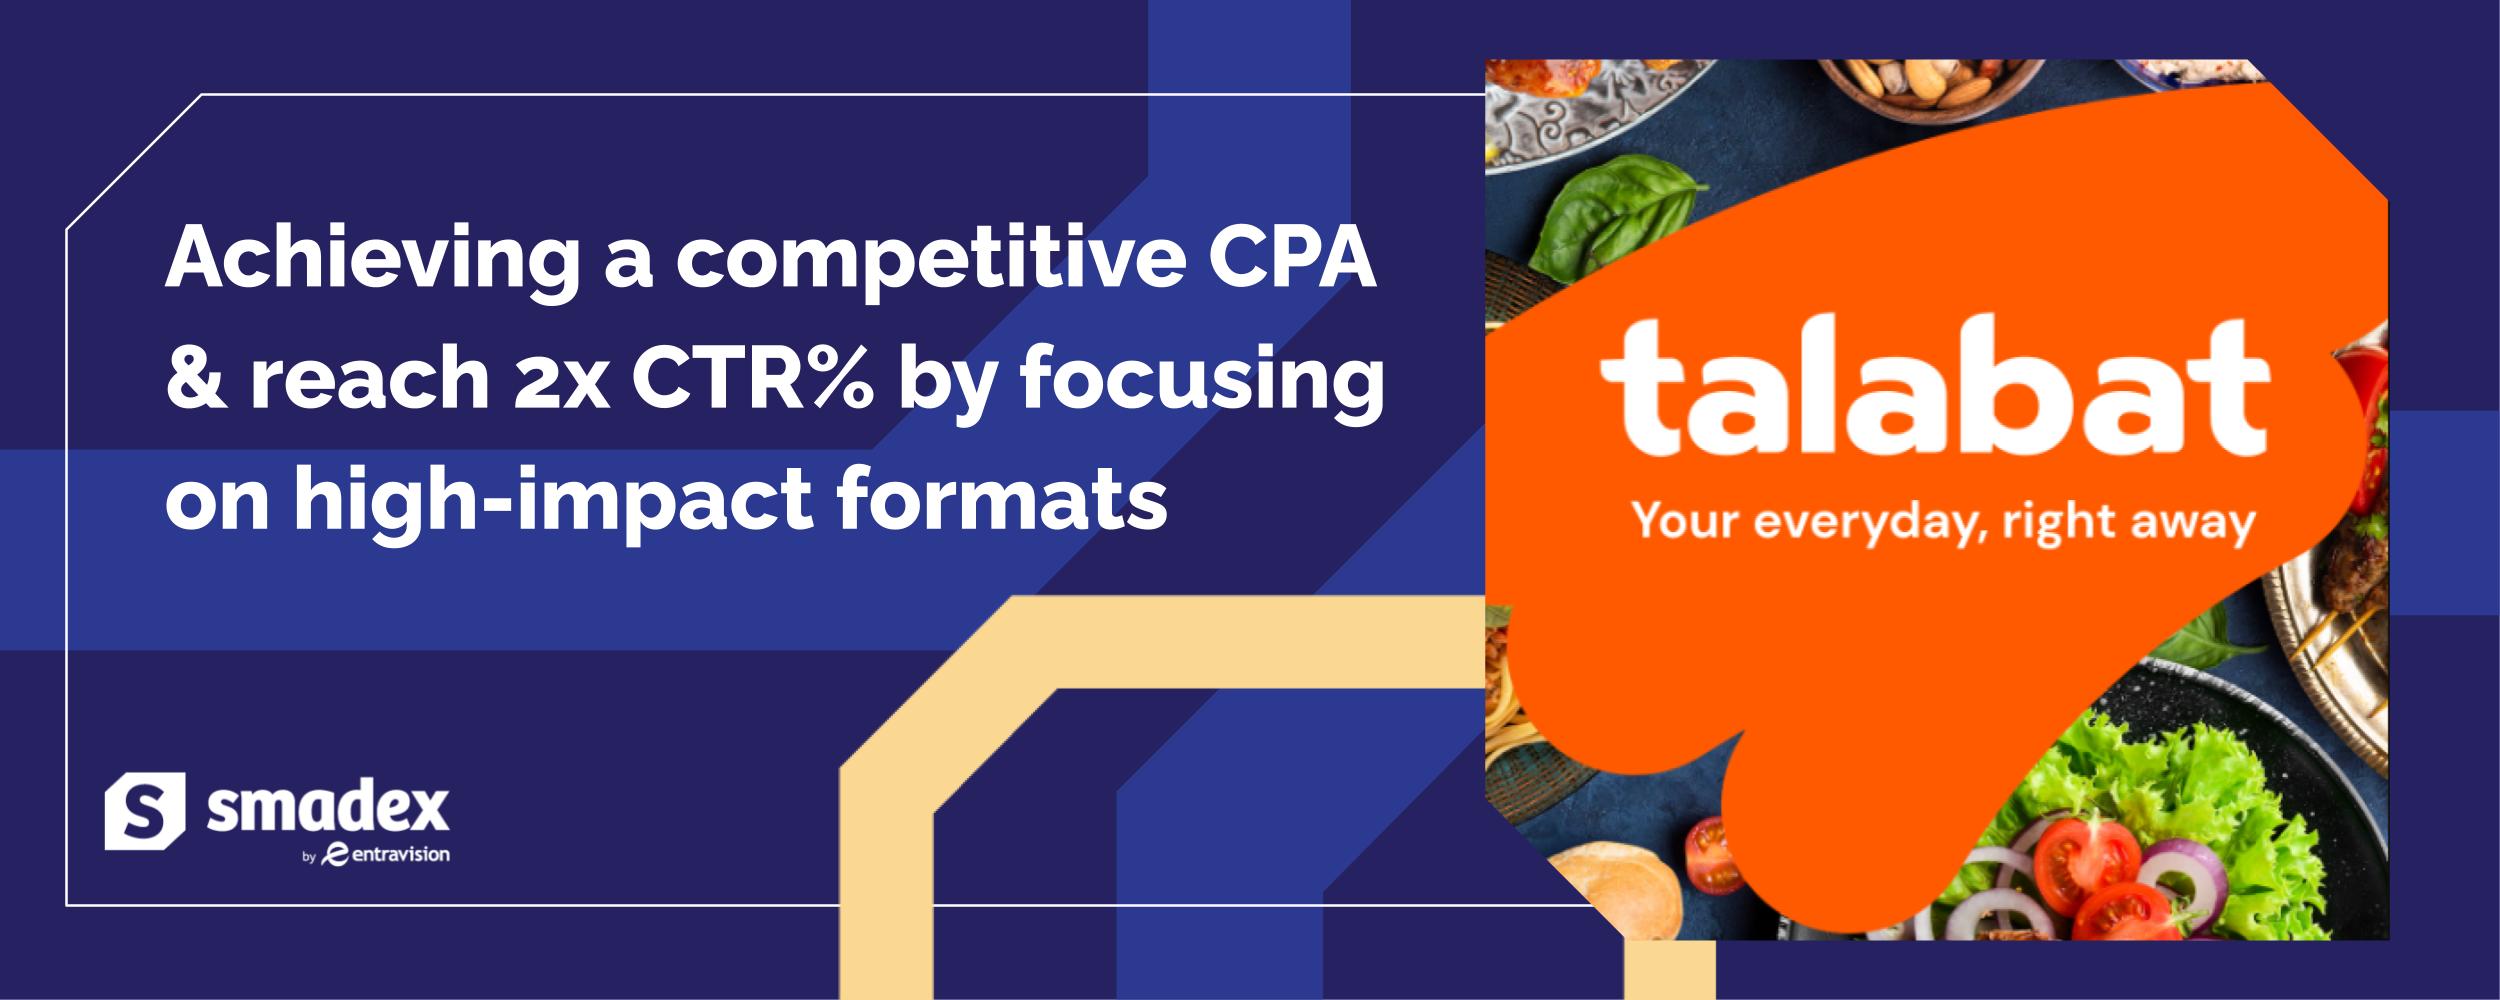 how-to-achieve-competitive-cpa-high-impact-formats